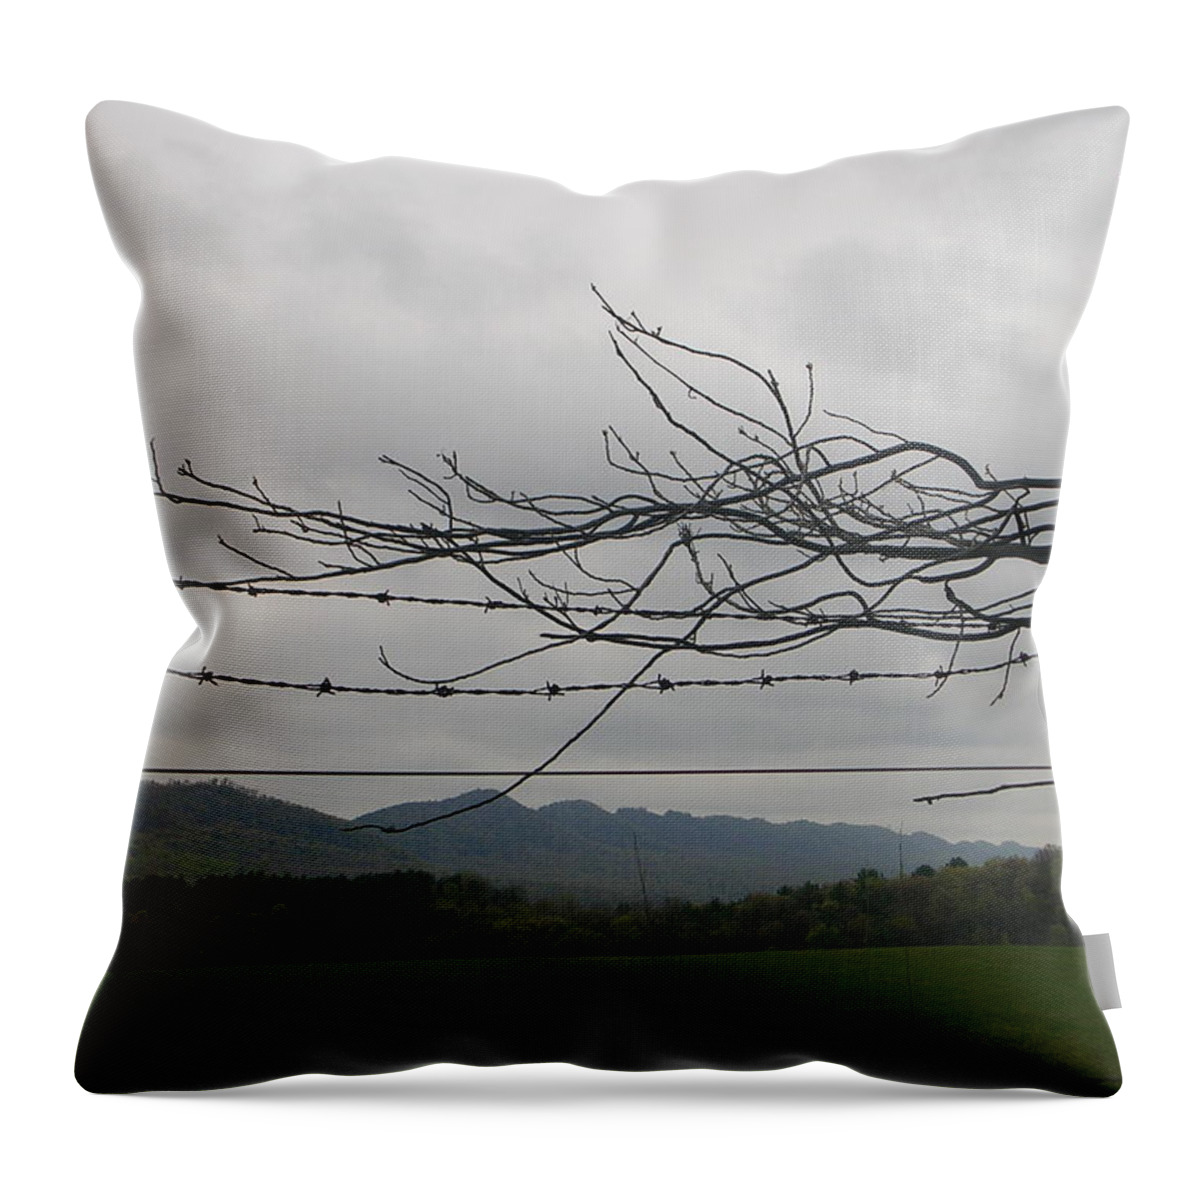 Landscape Throw Pillow featuring the photograph Barbed Wire Promenade by Jack Harries